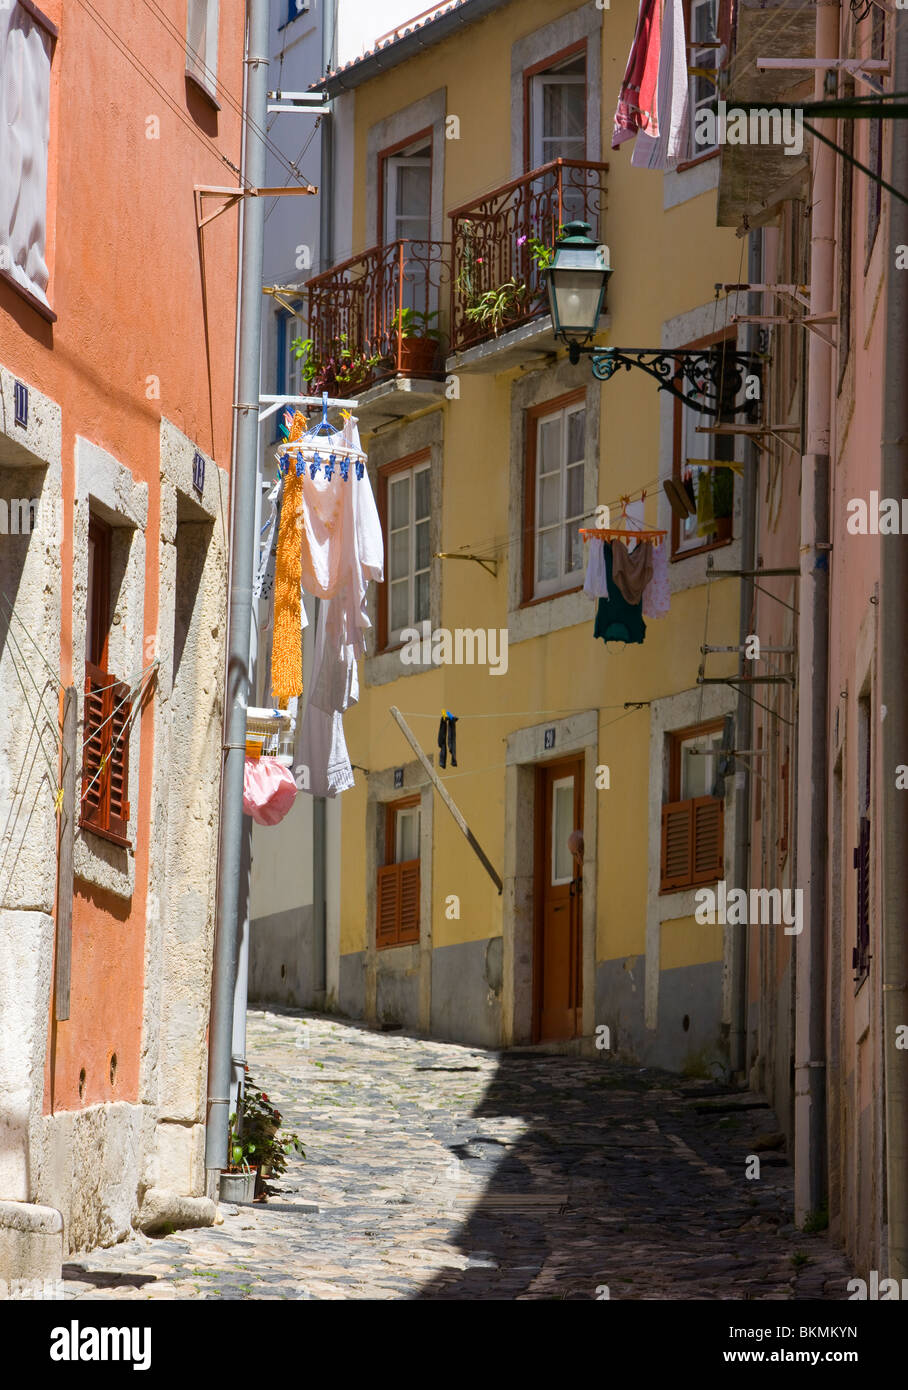 Portugal, Lisbon, typical small street in the Alfama district Stock Photo